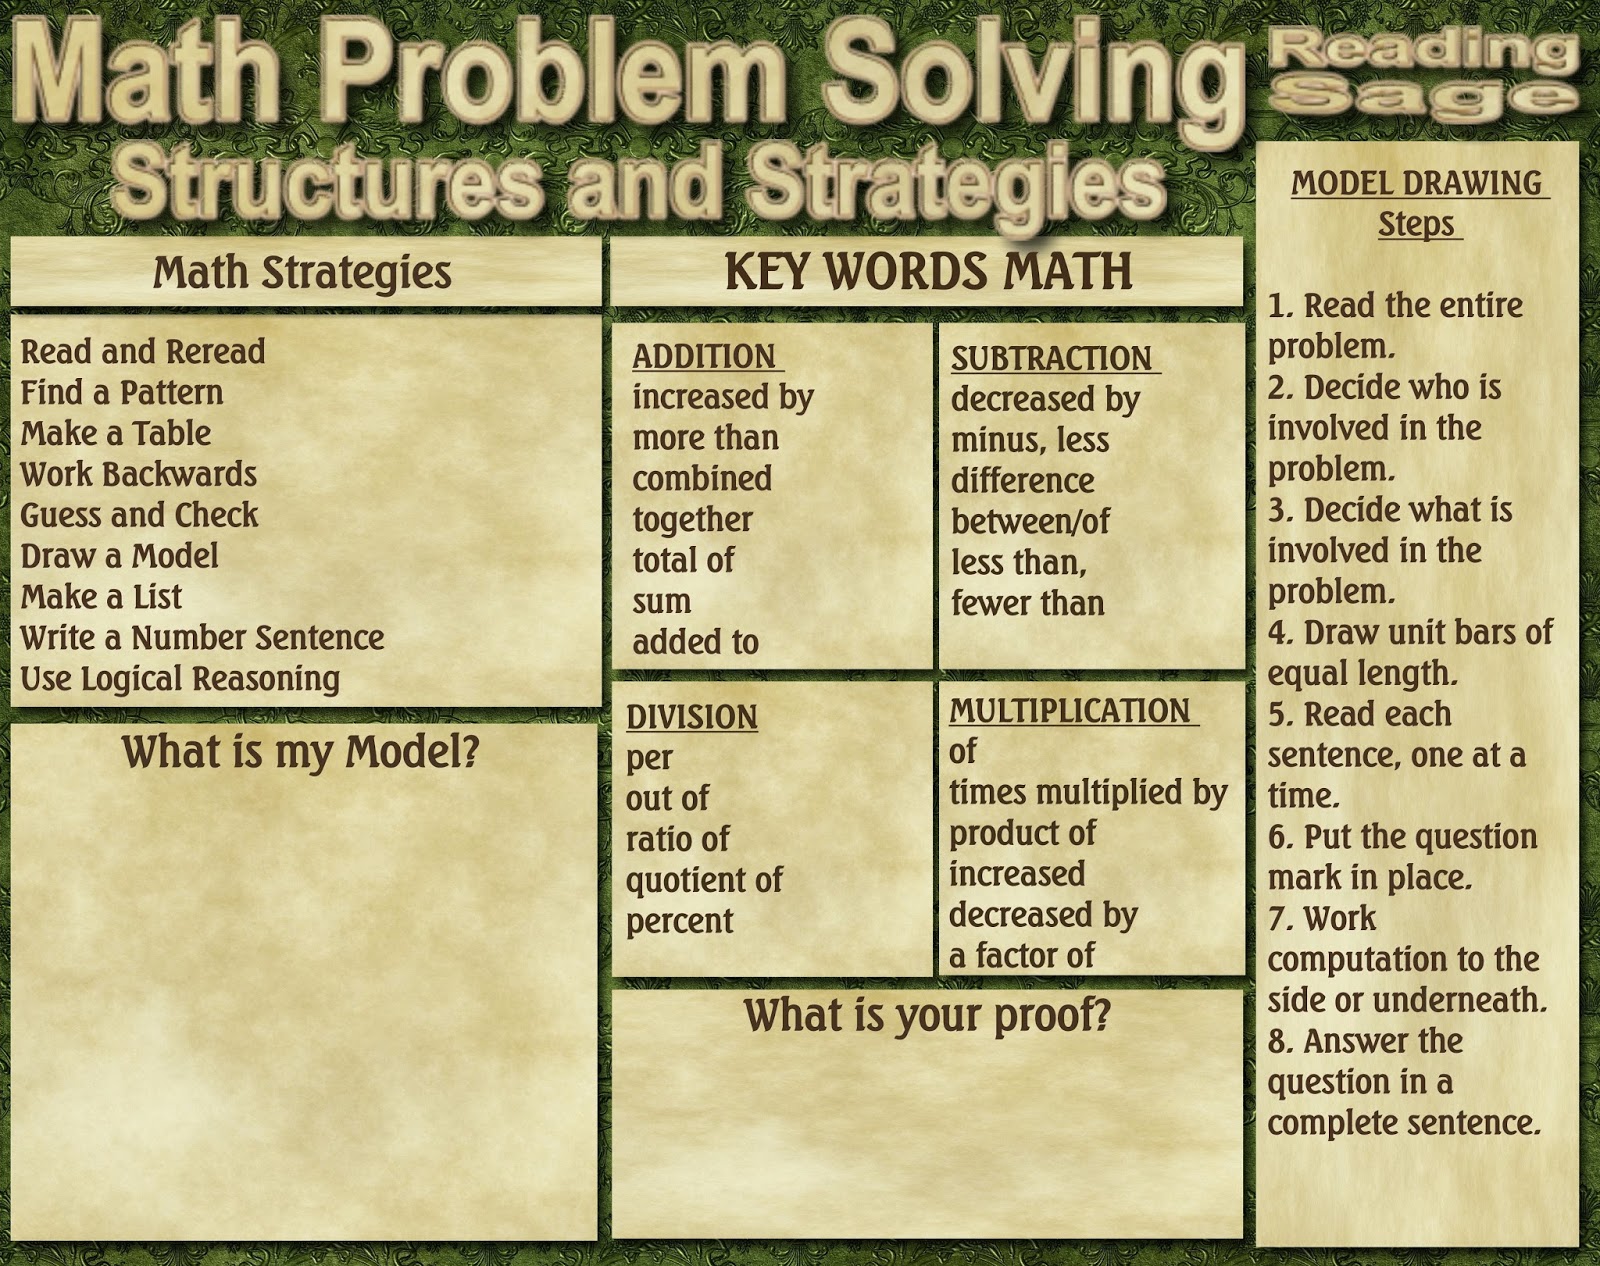 Problem solving steps in critical thinking